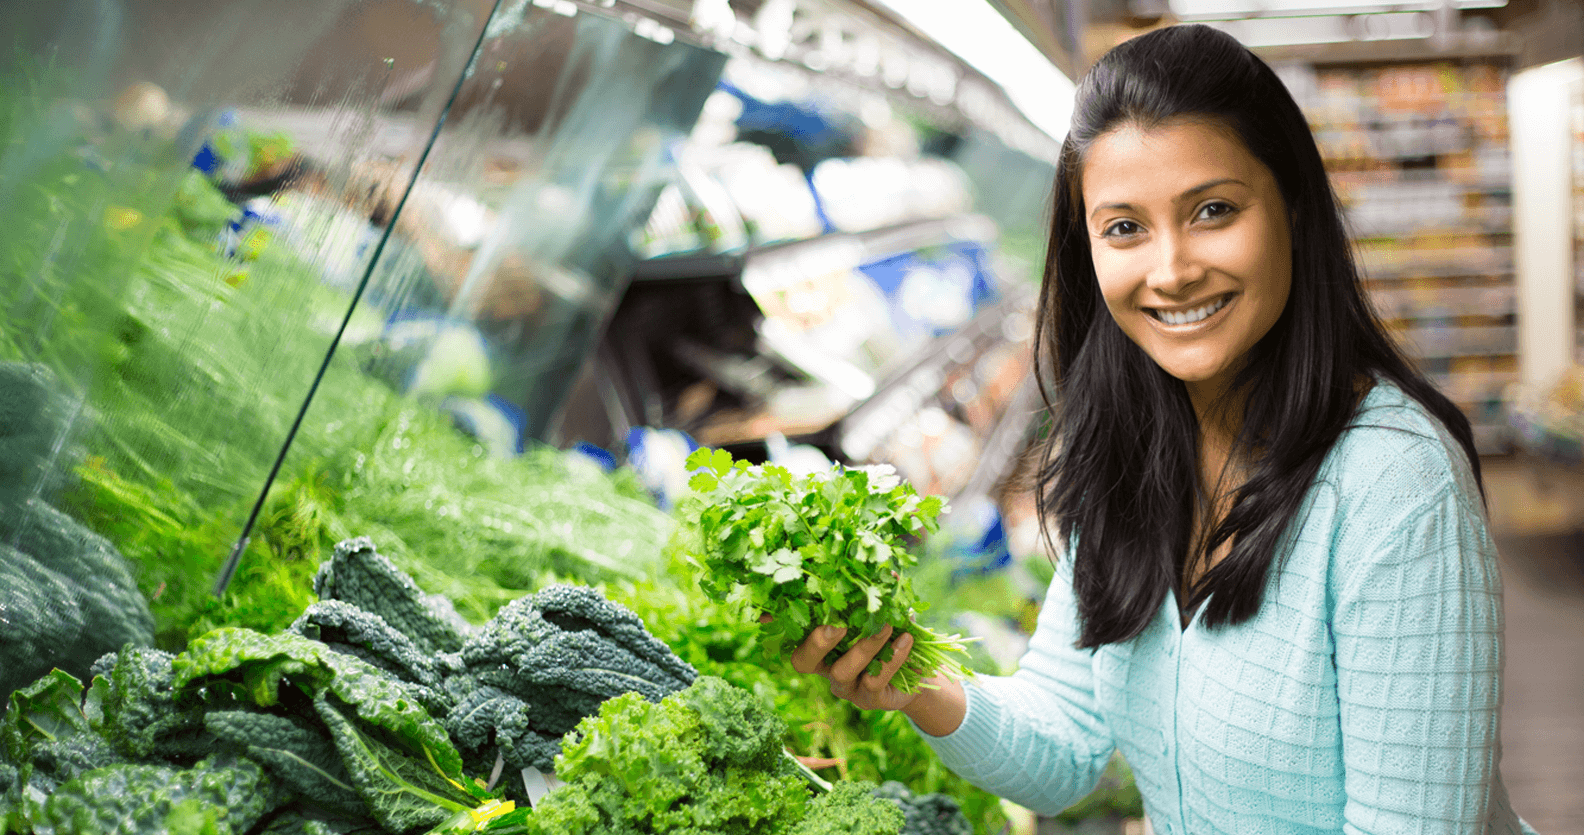 A dietician's guide for living your healthiest life in 2022